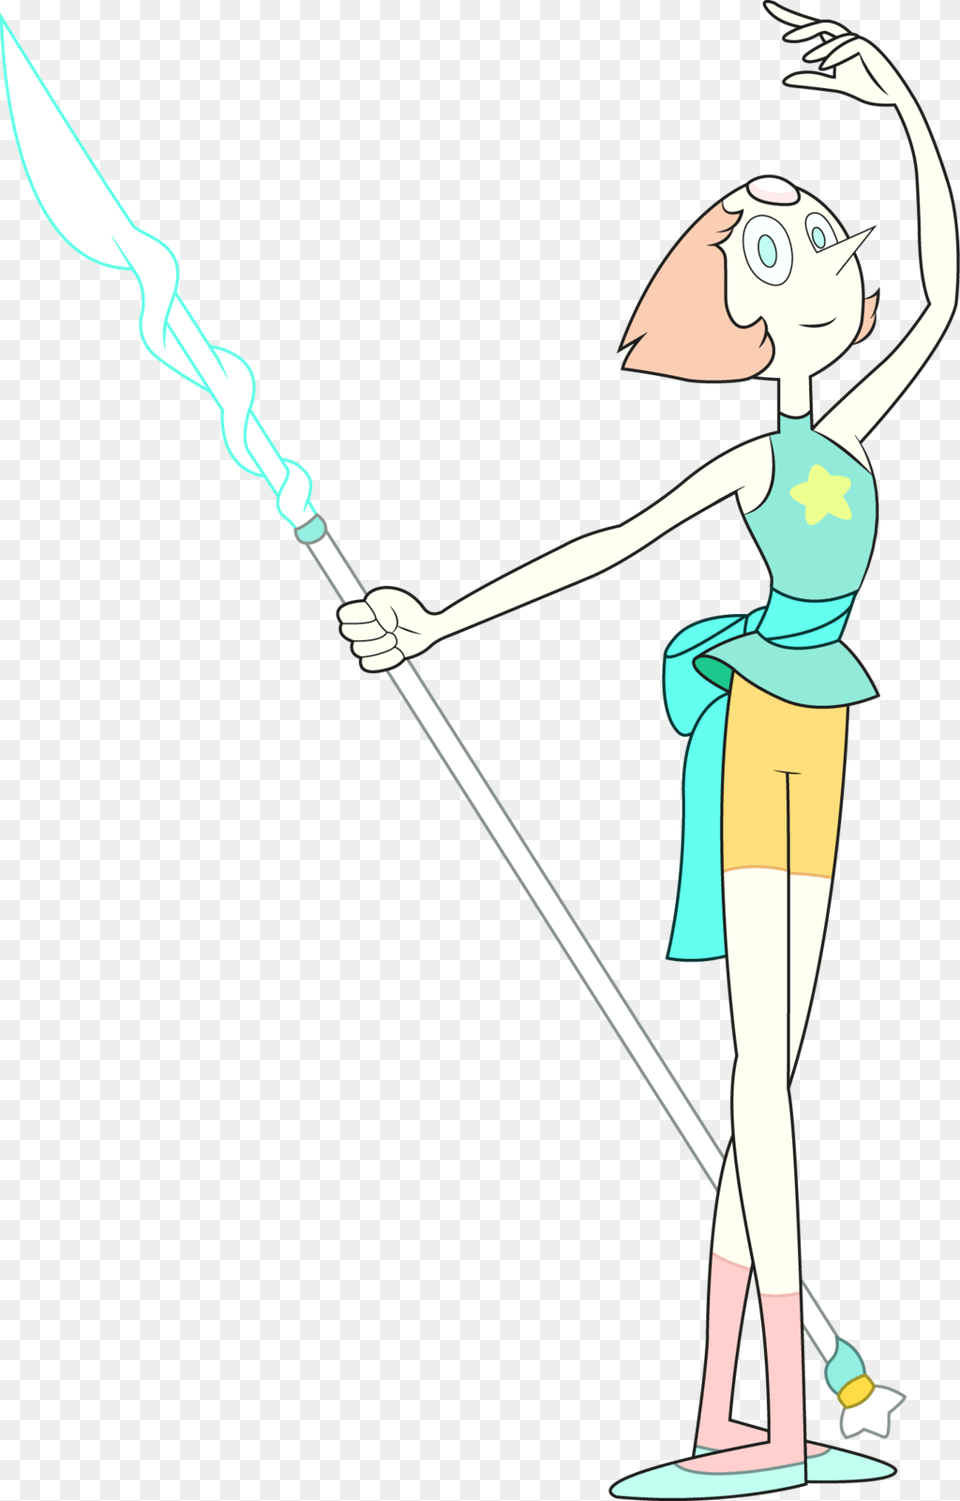 Pearl Steven Universe Download Cartoon, Weapon, Spear, Cleaning, Person Free Transparent Png